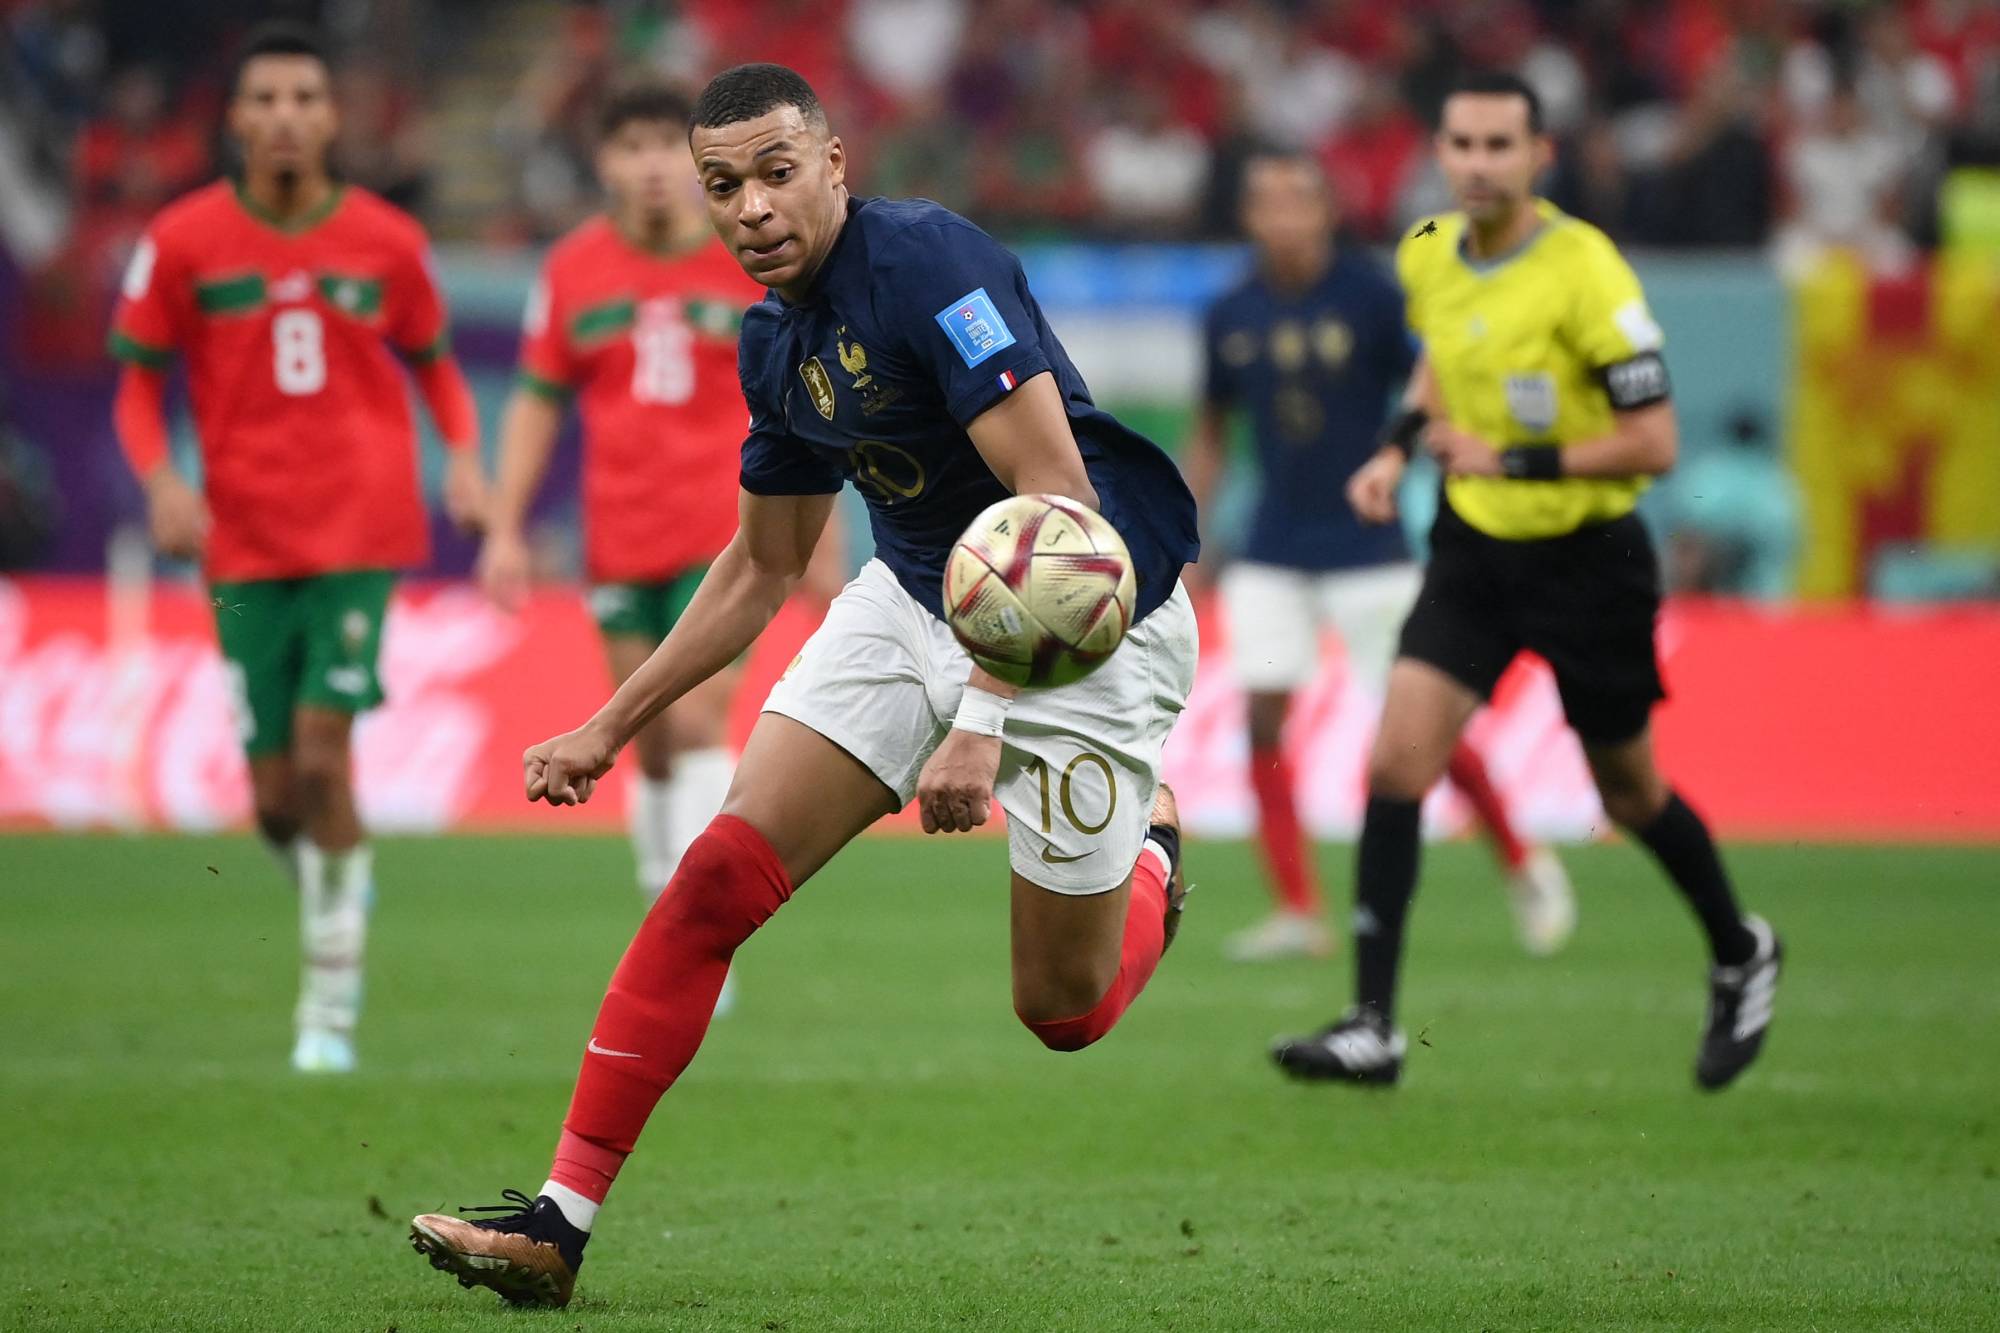 France already focused on taking last step against Argentina in World Cup final